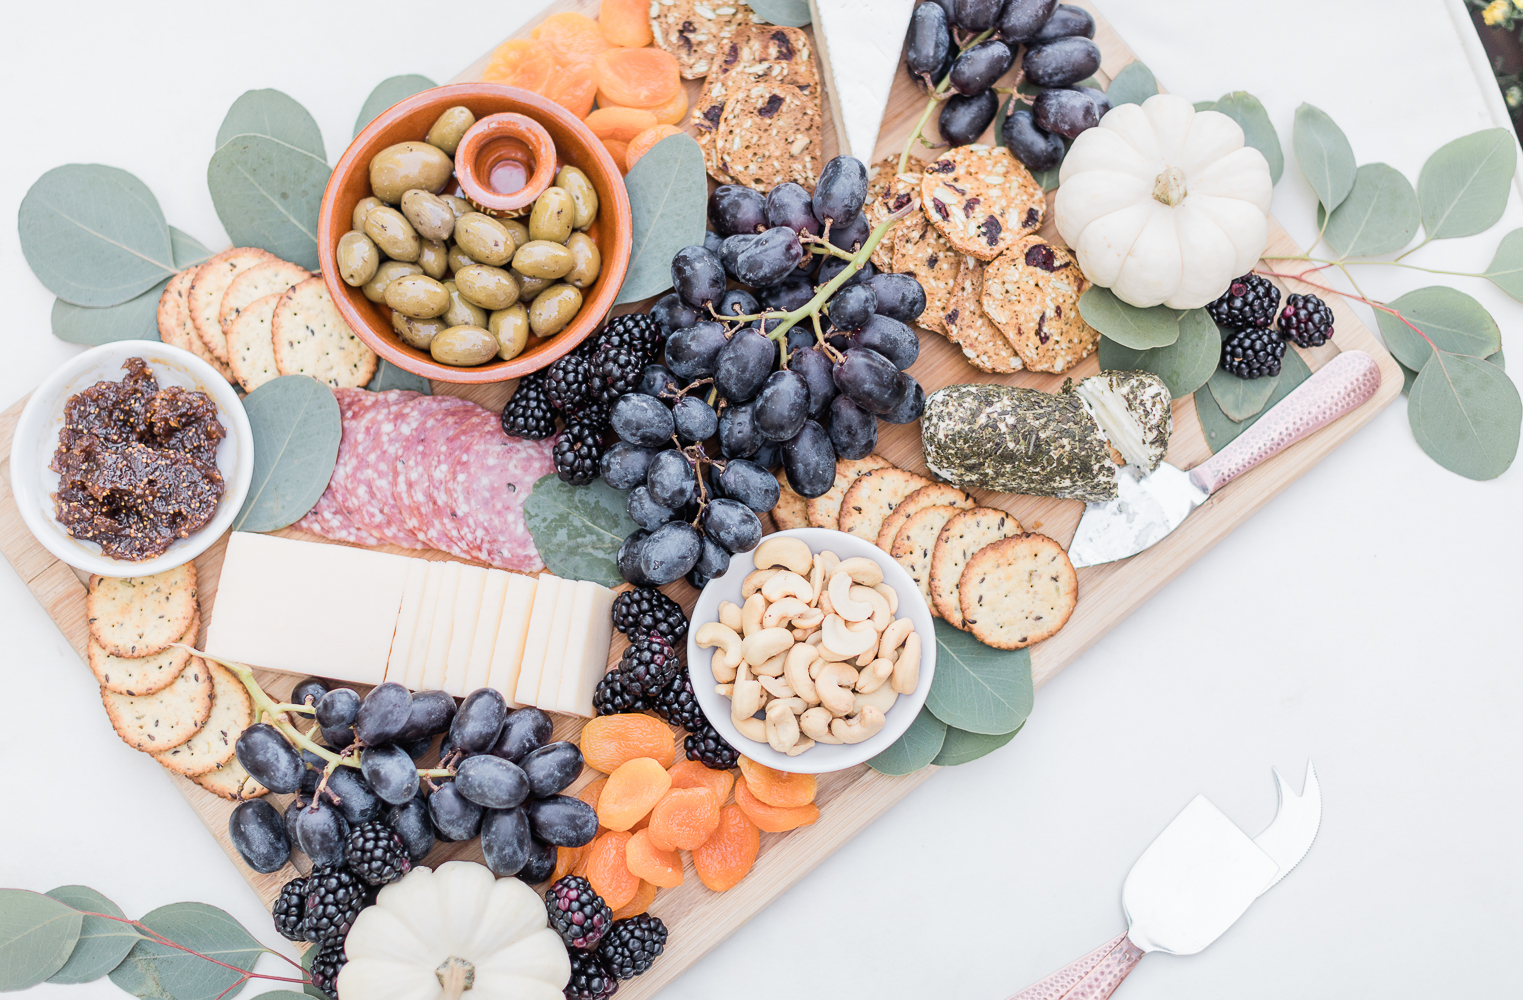 Blogger Stephanie Ziajka shows how to build a cheese board for fall on Diary of a Debutante